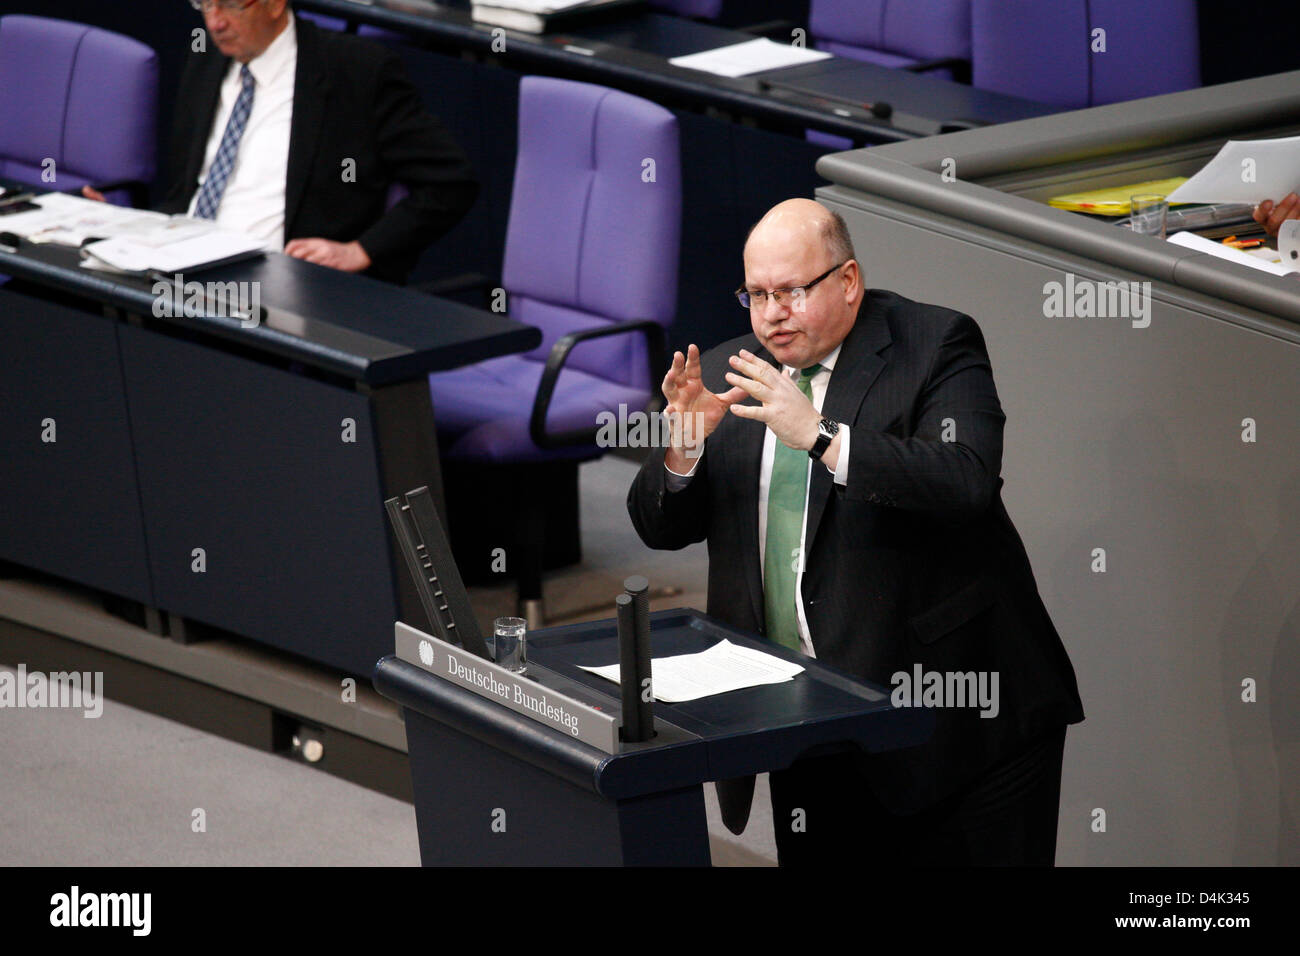 Berlin, Germany. 15th March 2013. Peter Altmaier (CDU), Federal Minister of Environment, holding a speech at Bundestag. Credit:  Reynaldo Chaib Paganelli / Alamy Live News Stock Photo